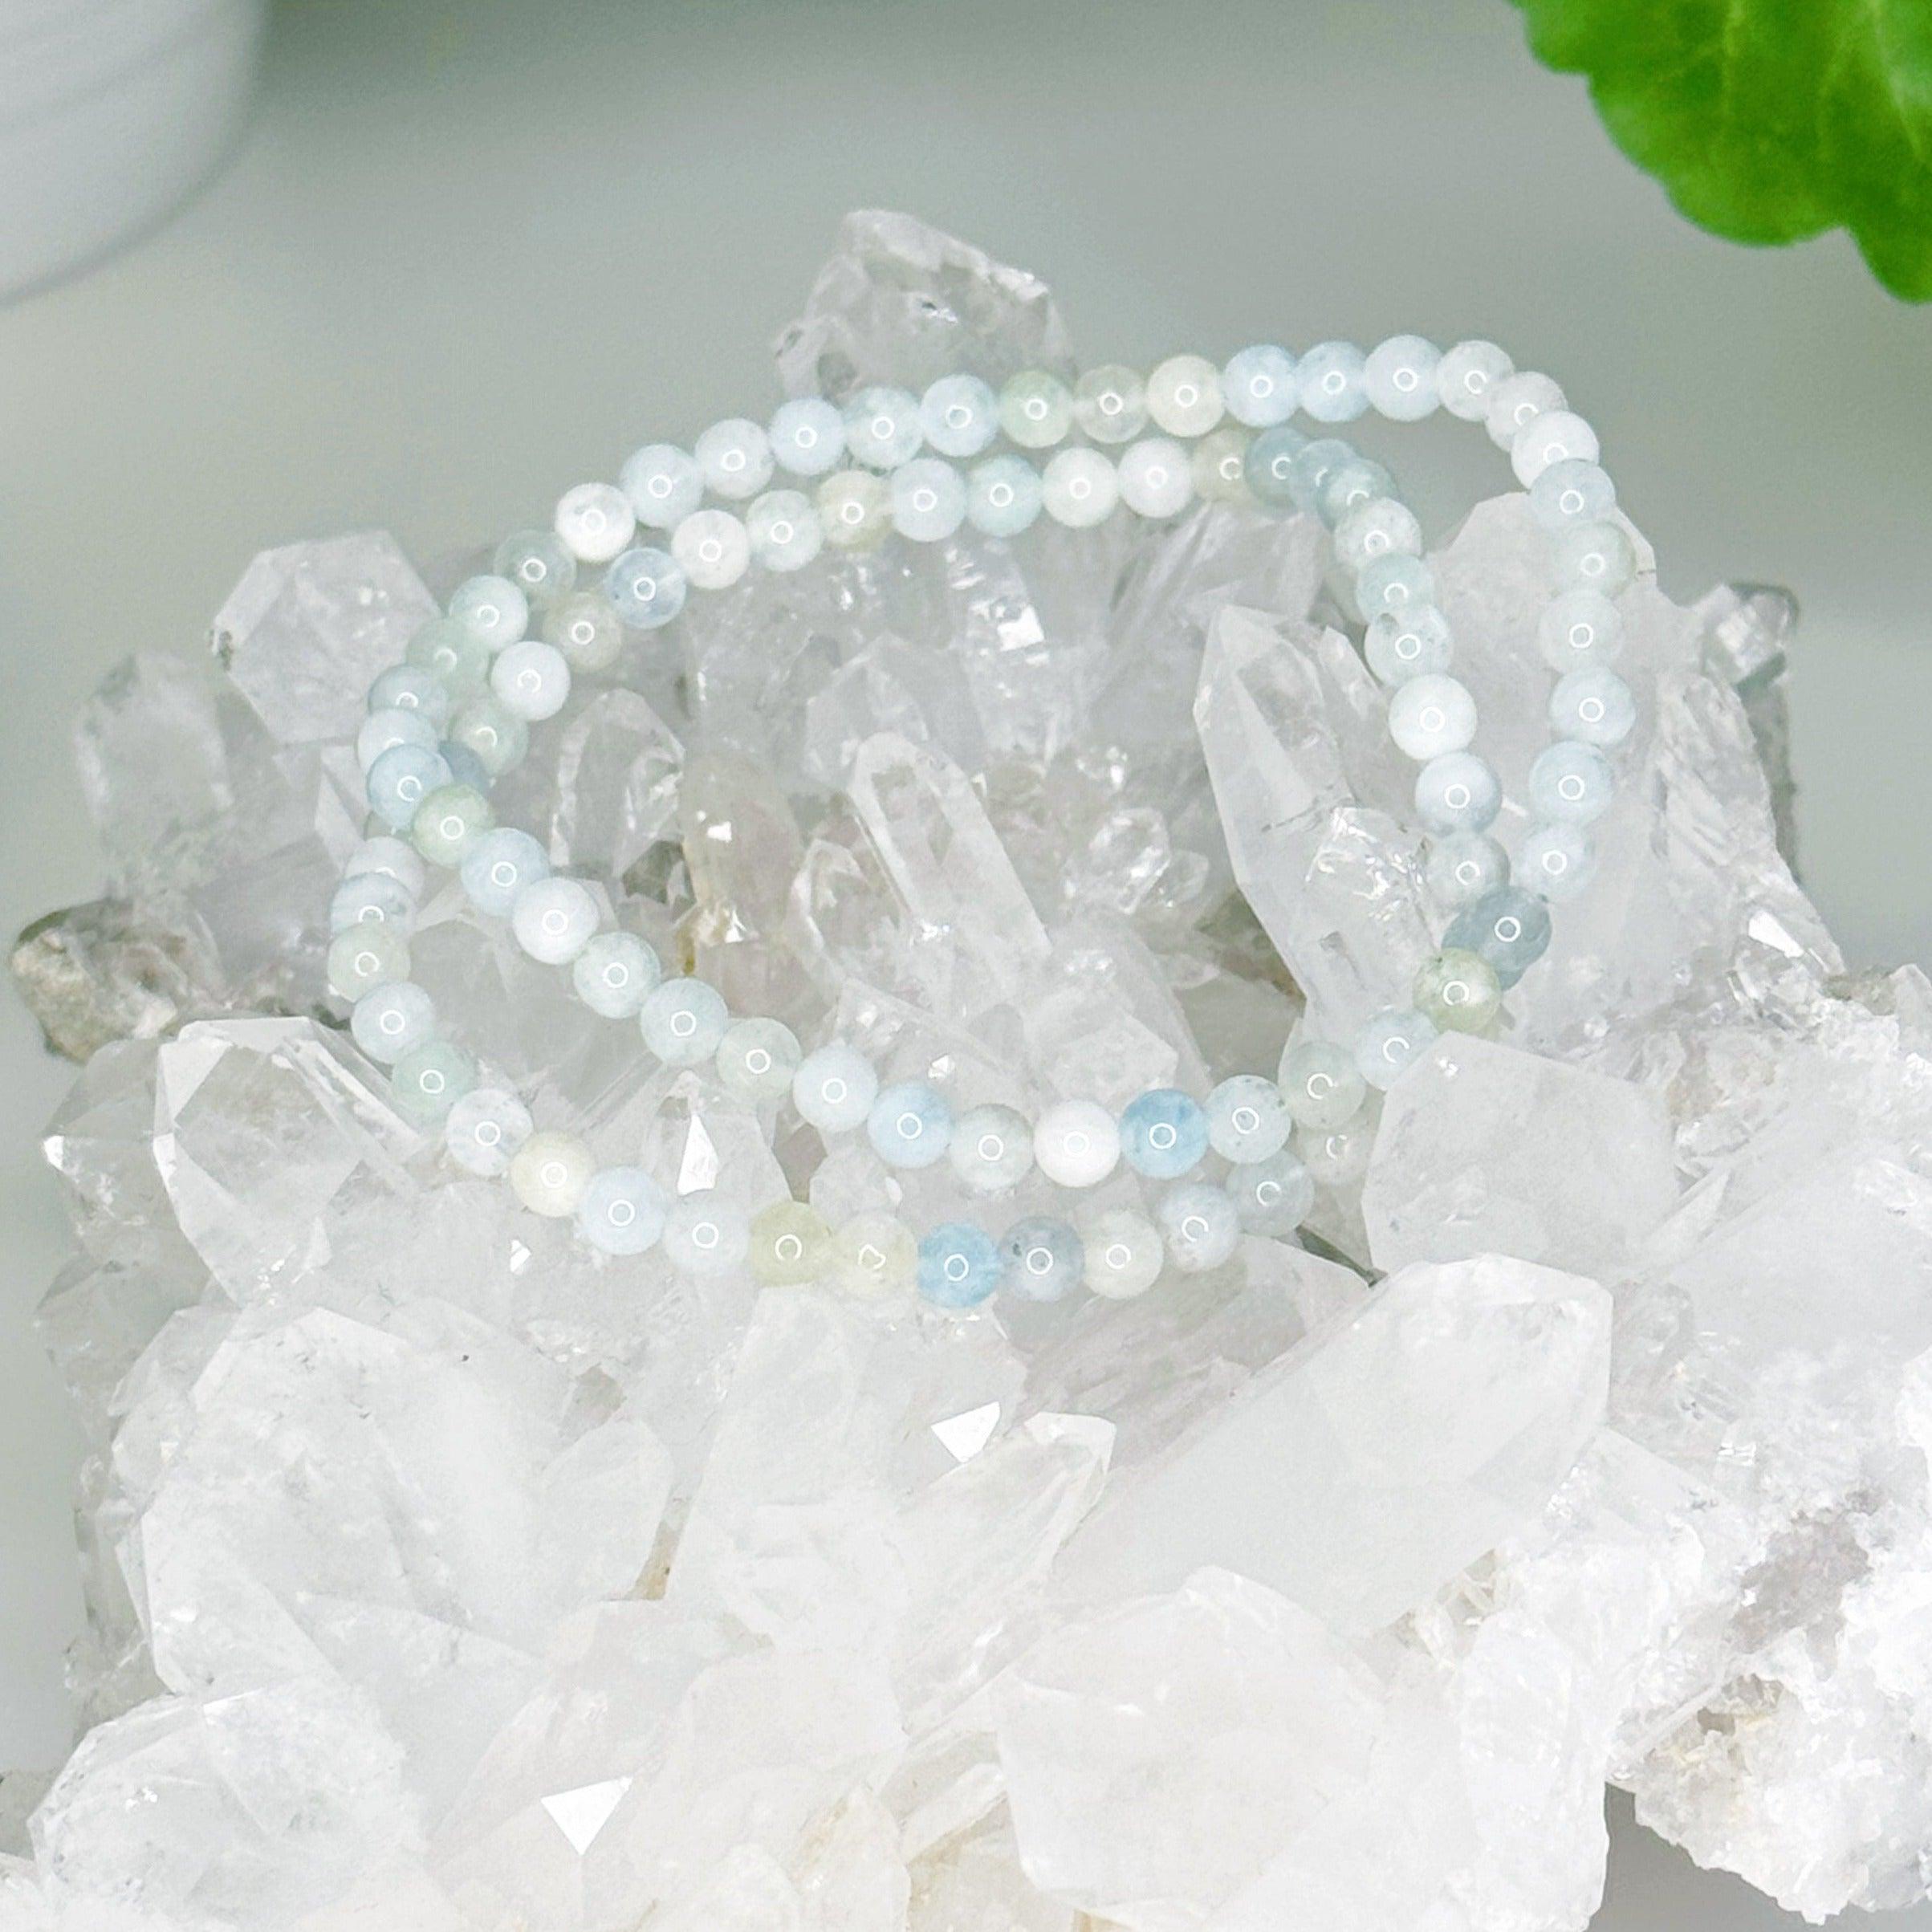 AQUAMARINE 4mm - HANDMADE CRYSTAL BRACELET - 4mm, aquamarine, aquarius, aquarius stack, aries, aries stack, blue, bracelet, crystal bracelet, gemini, gemini stack, handmade bracelet, jewelry, libra, libra stack, pisces, pisces stack, recently added, scorpio, scorpio stack, taurus, taurus stack, valentines bracelets, valentines vibes, water, Wearable - The Mineral Maven